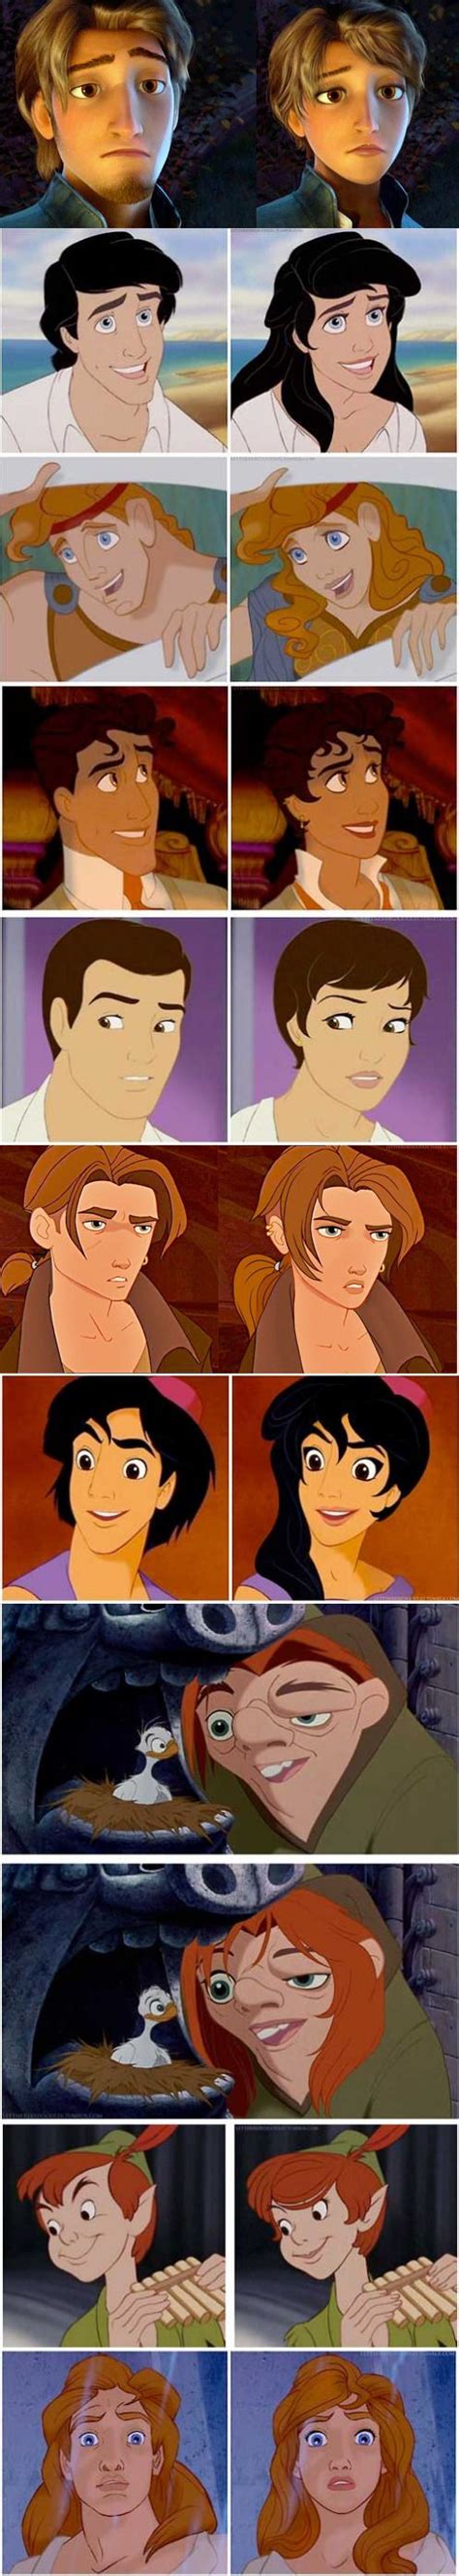 Gender Bending Disney Characters On Imgfave Funny Disney Characters